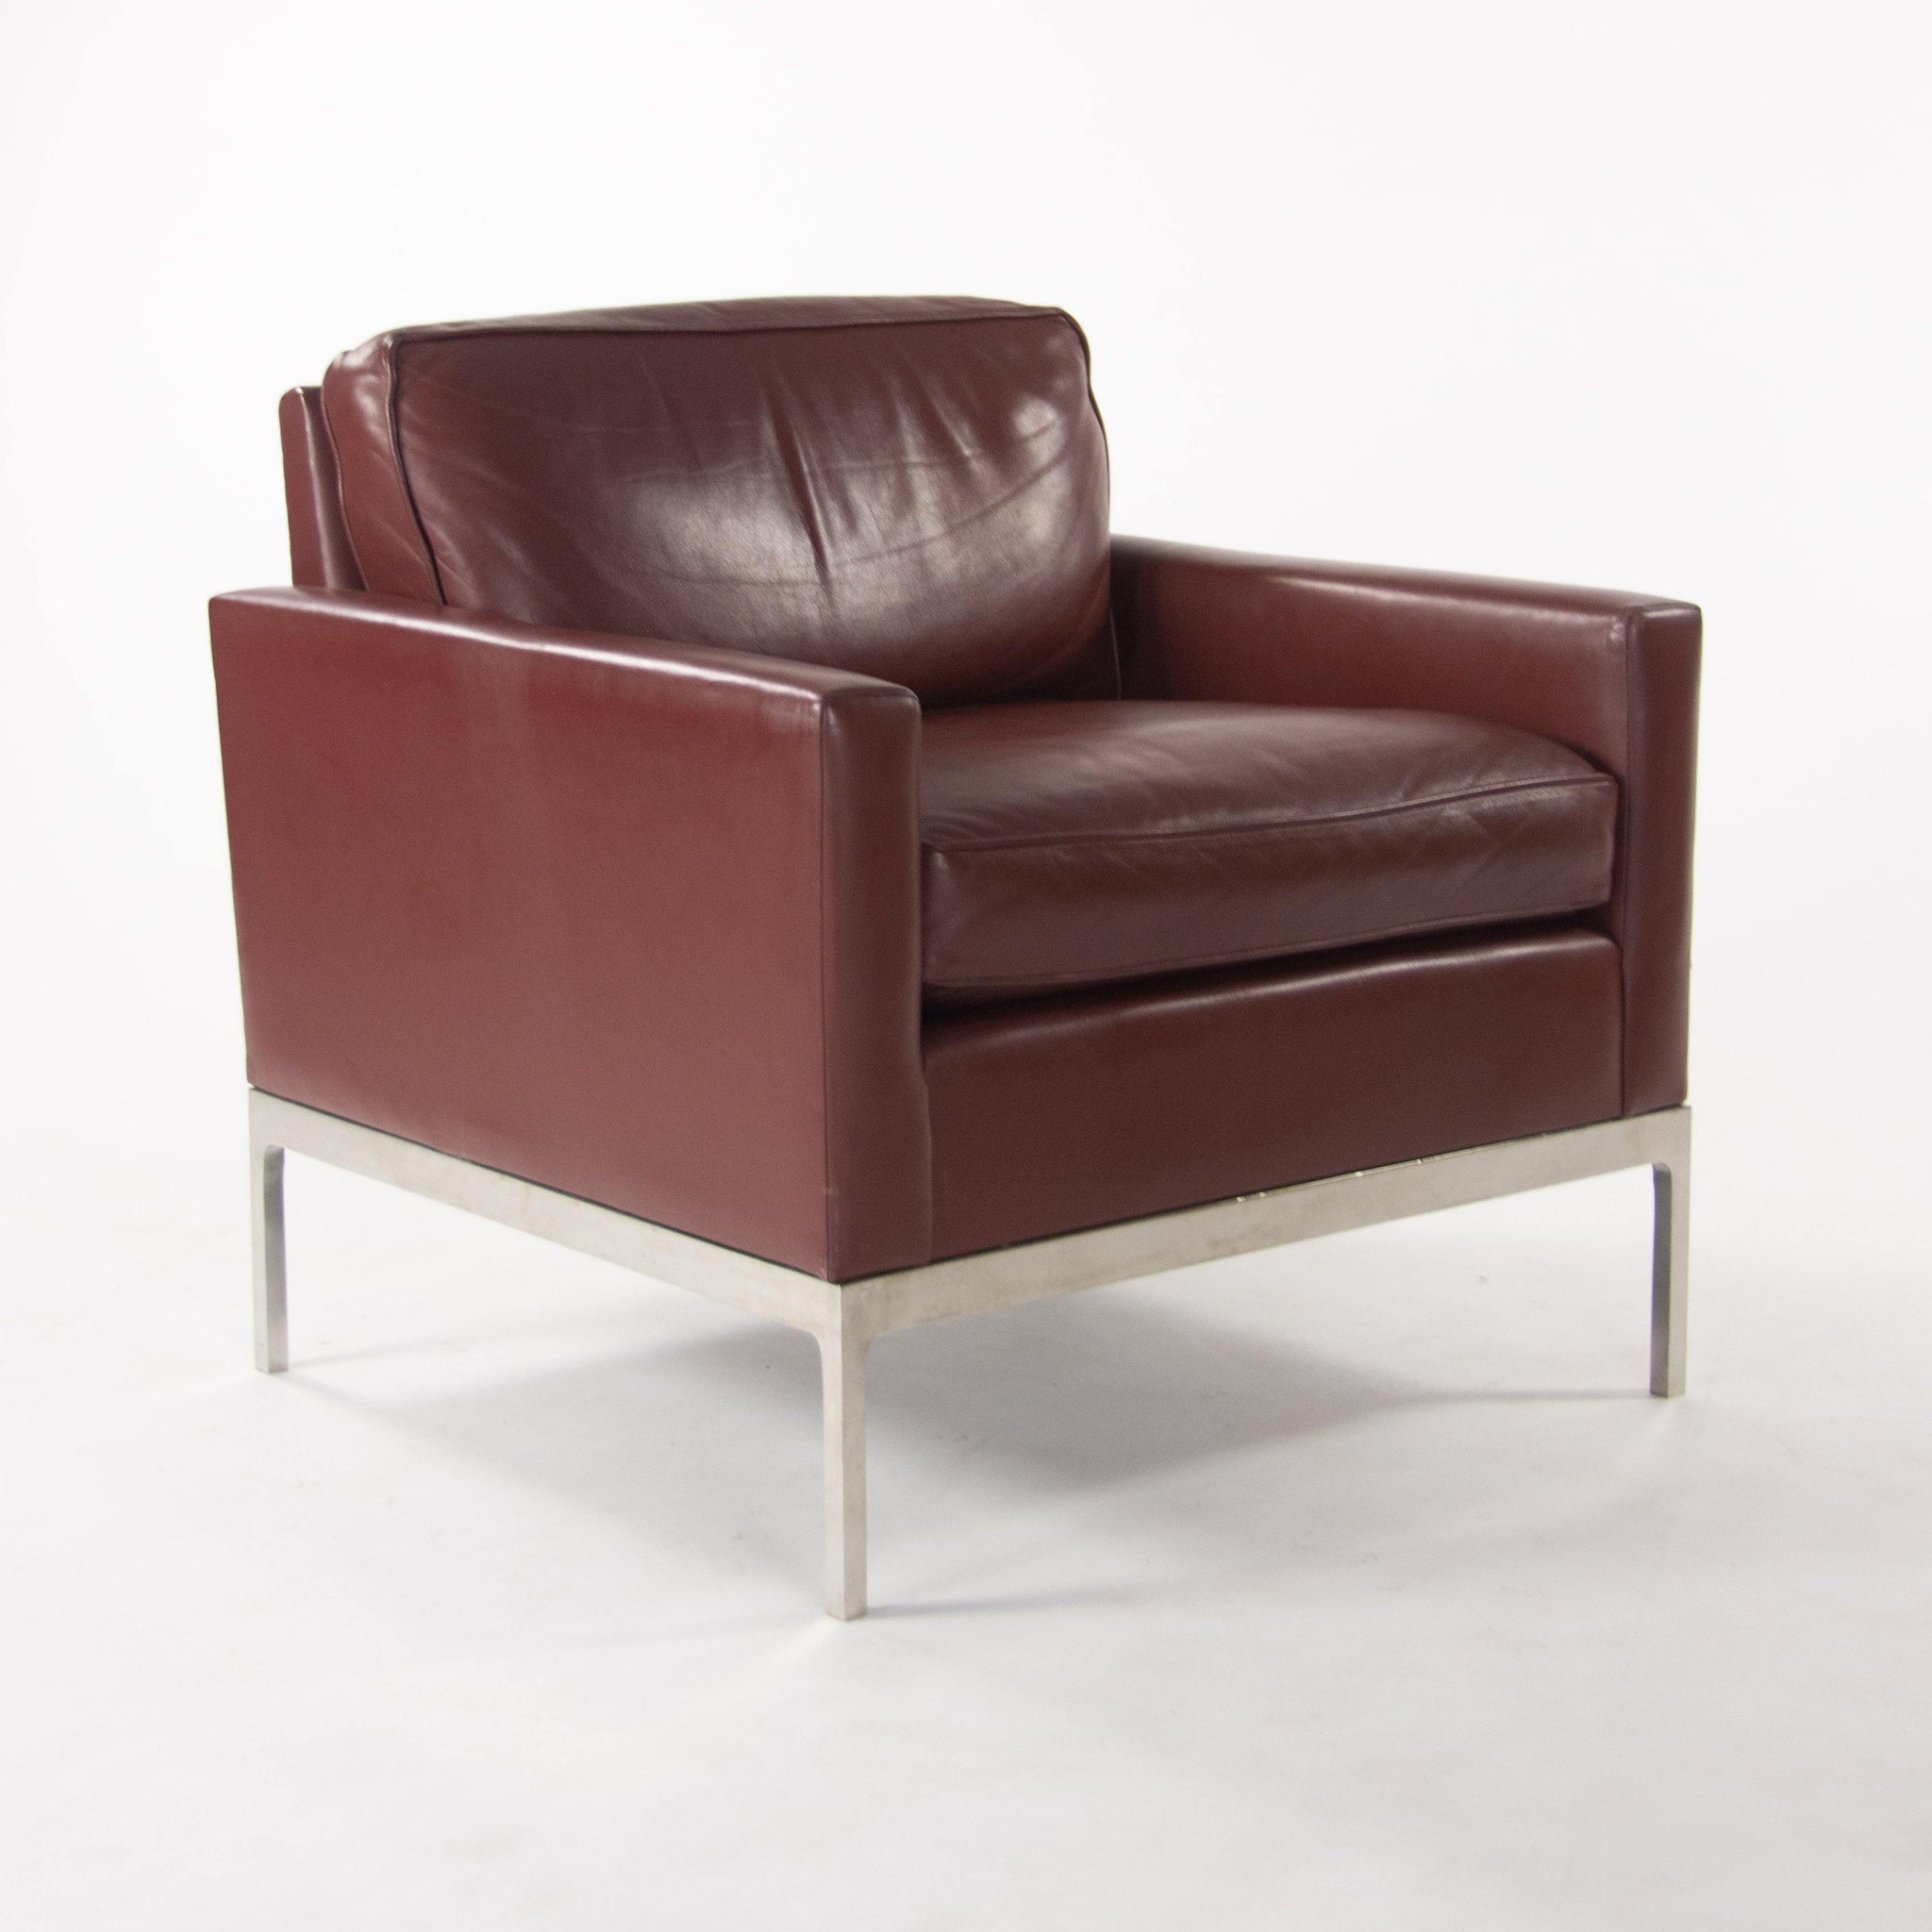 Nicos Zographos Red Leather 70 Club Chair Armchair with Polished Stainless Legs - Rarify Inc.